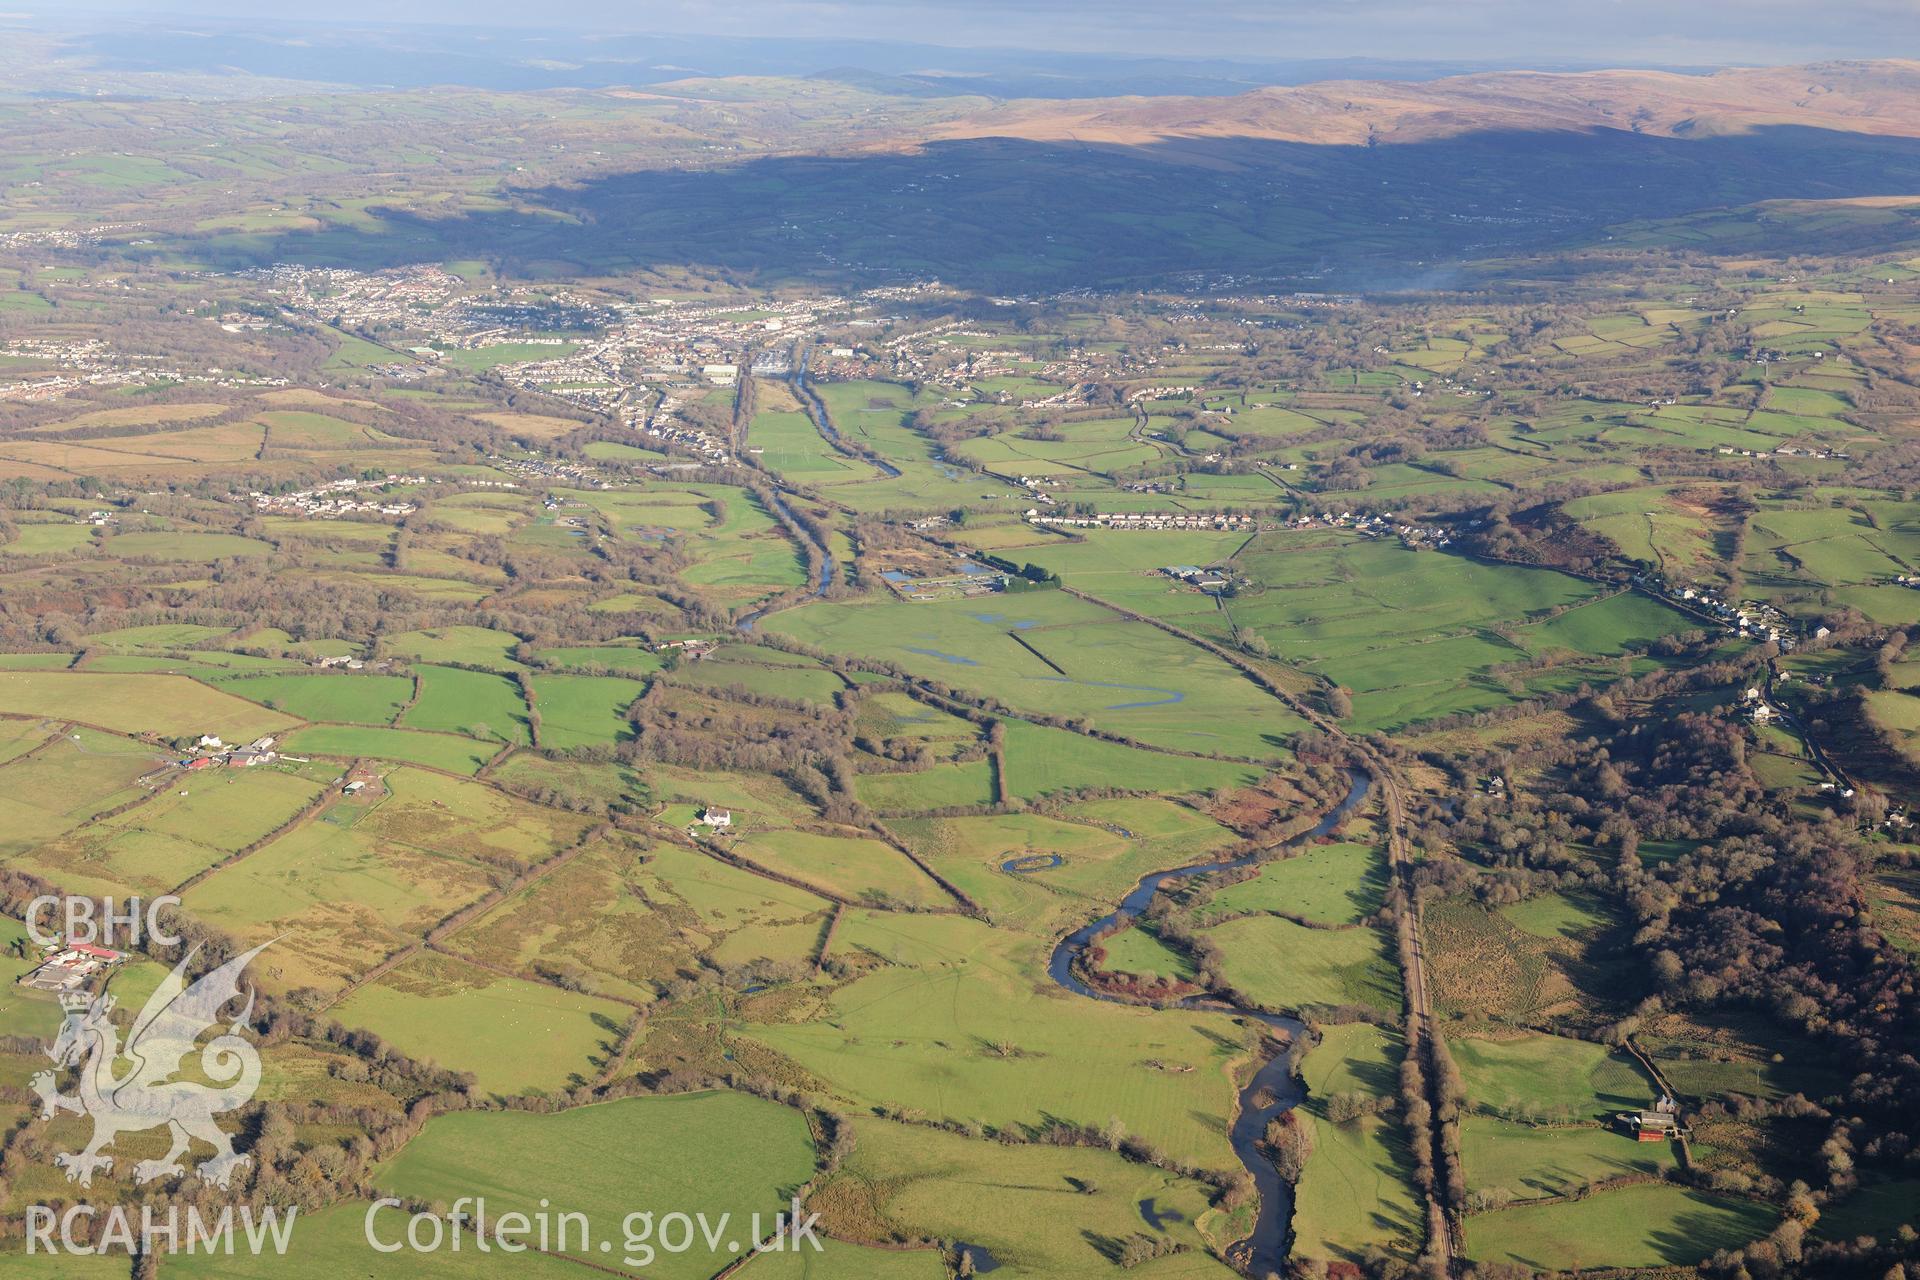 RCAHMW colour oblique photograph of Ynys y Capel, landscape view from south-west along Loughor valley. Taken by Toby Driver on 28/11/2012.